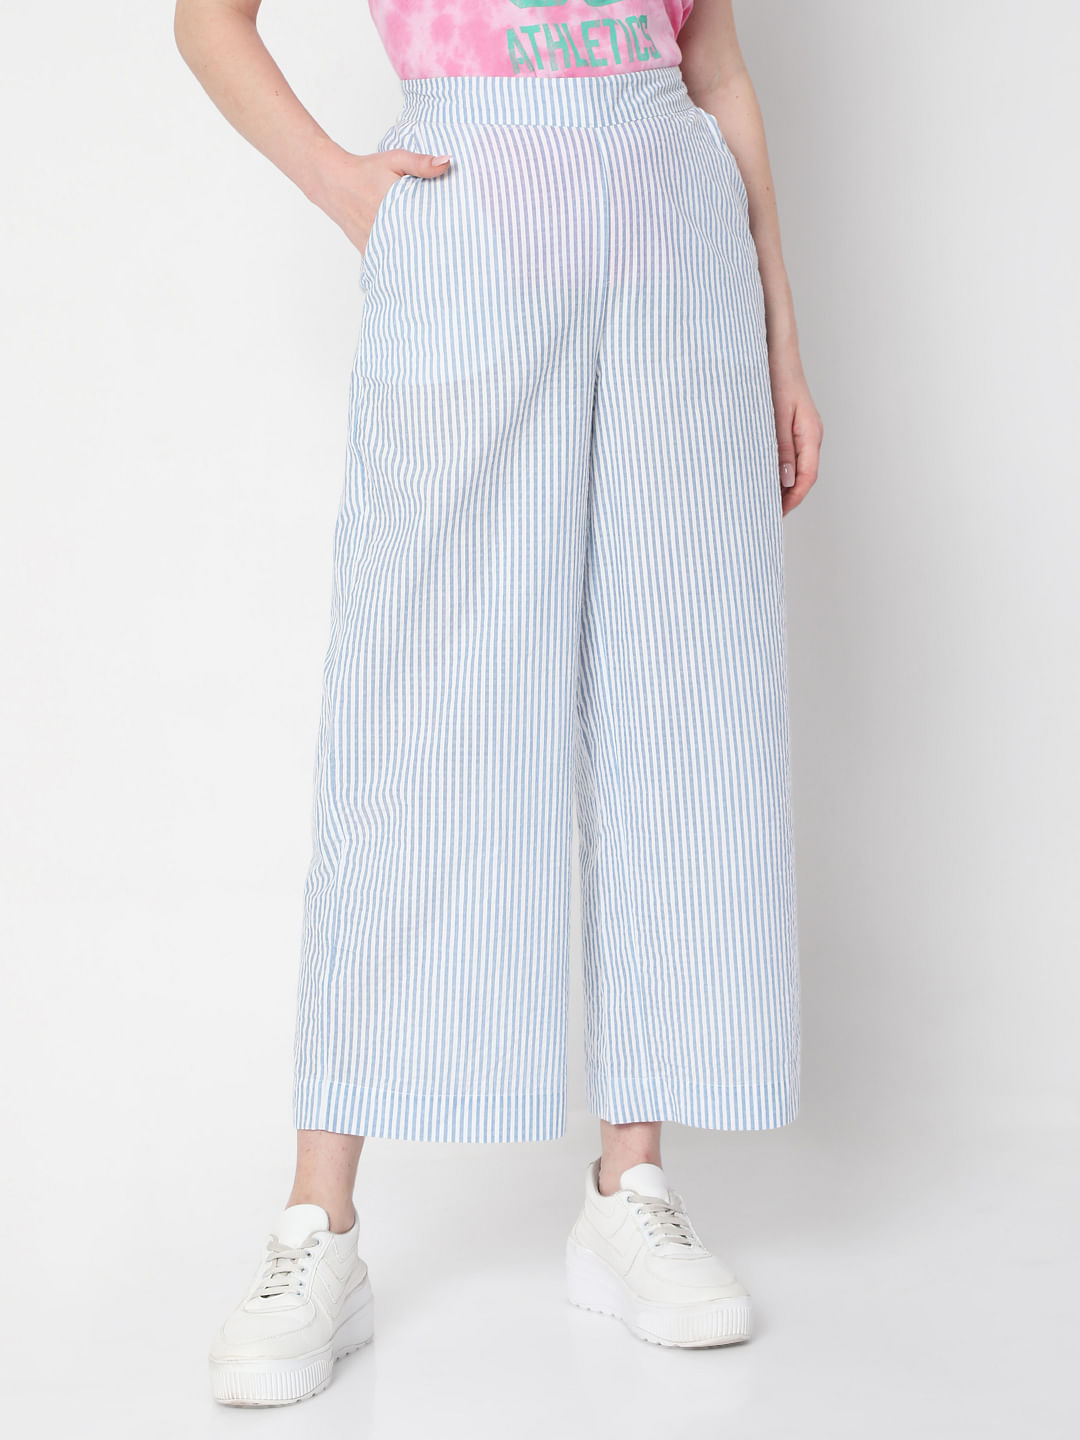 Levis Blue Striped Stay Loose Carpenter Trousers Levis